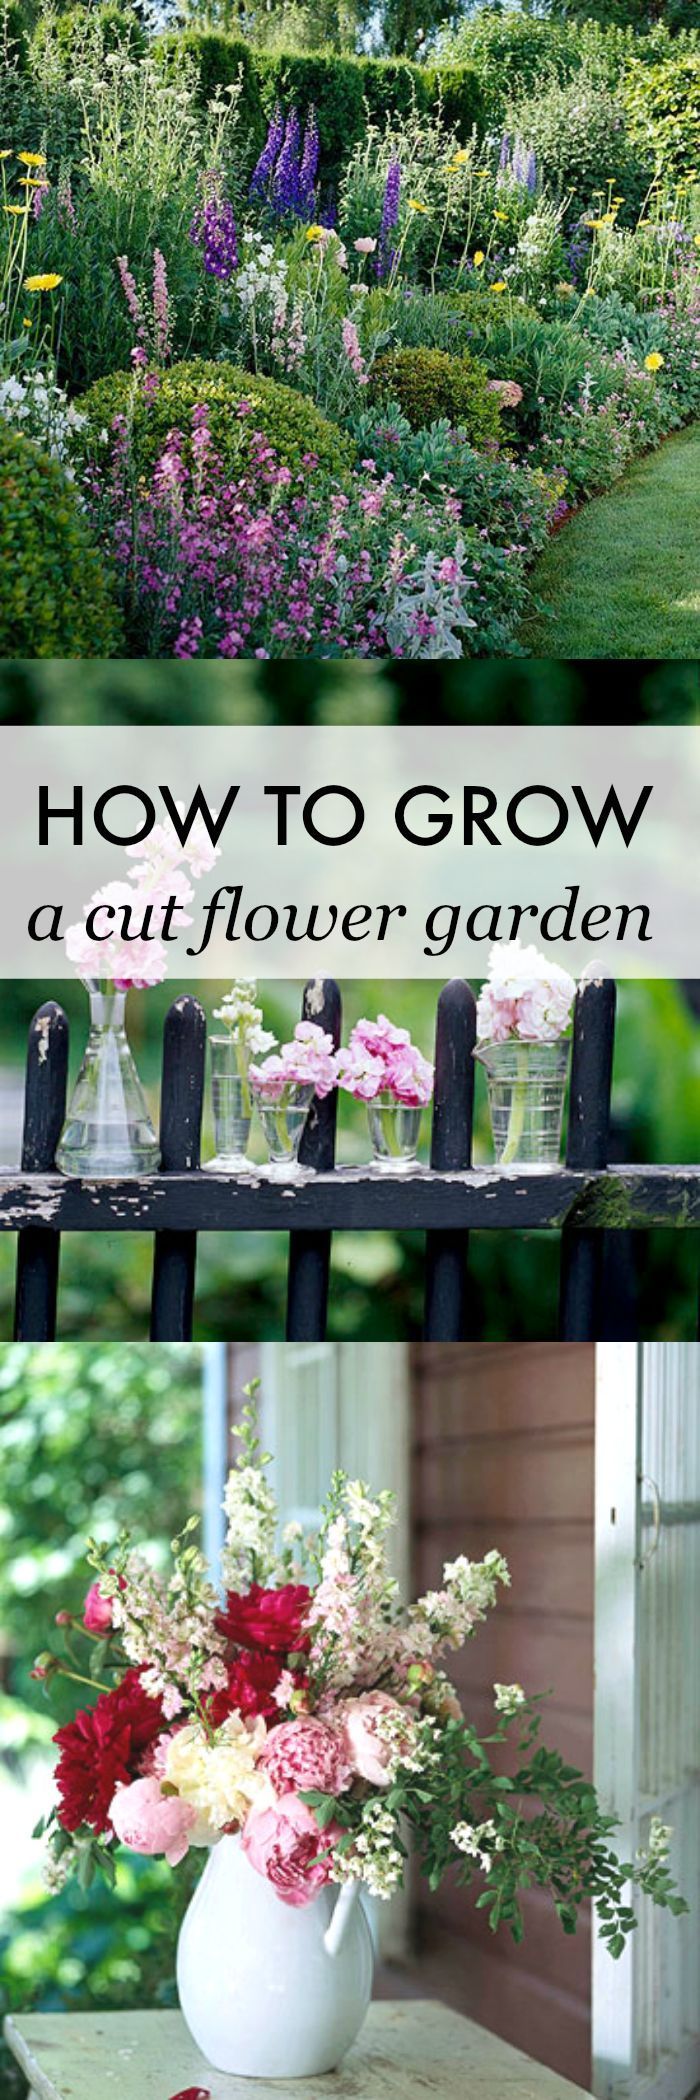 Learn how to grow your own cut flower garden! Make your own beautiful flower arr...